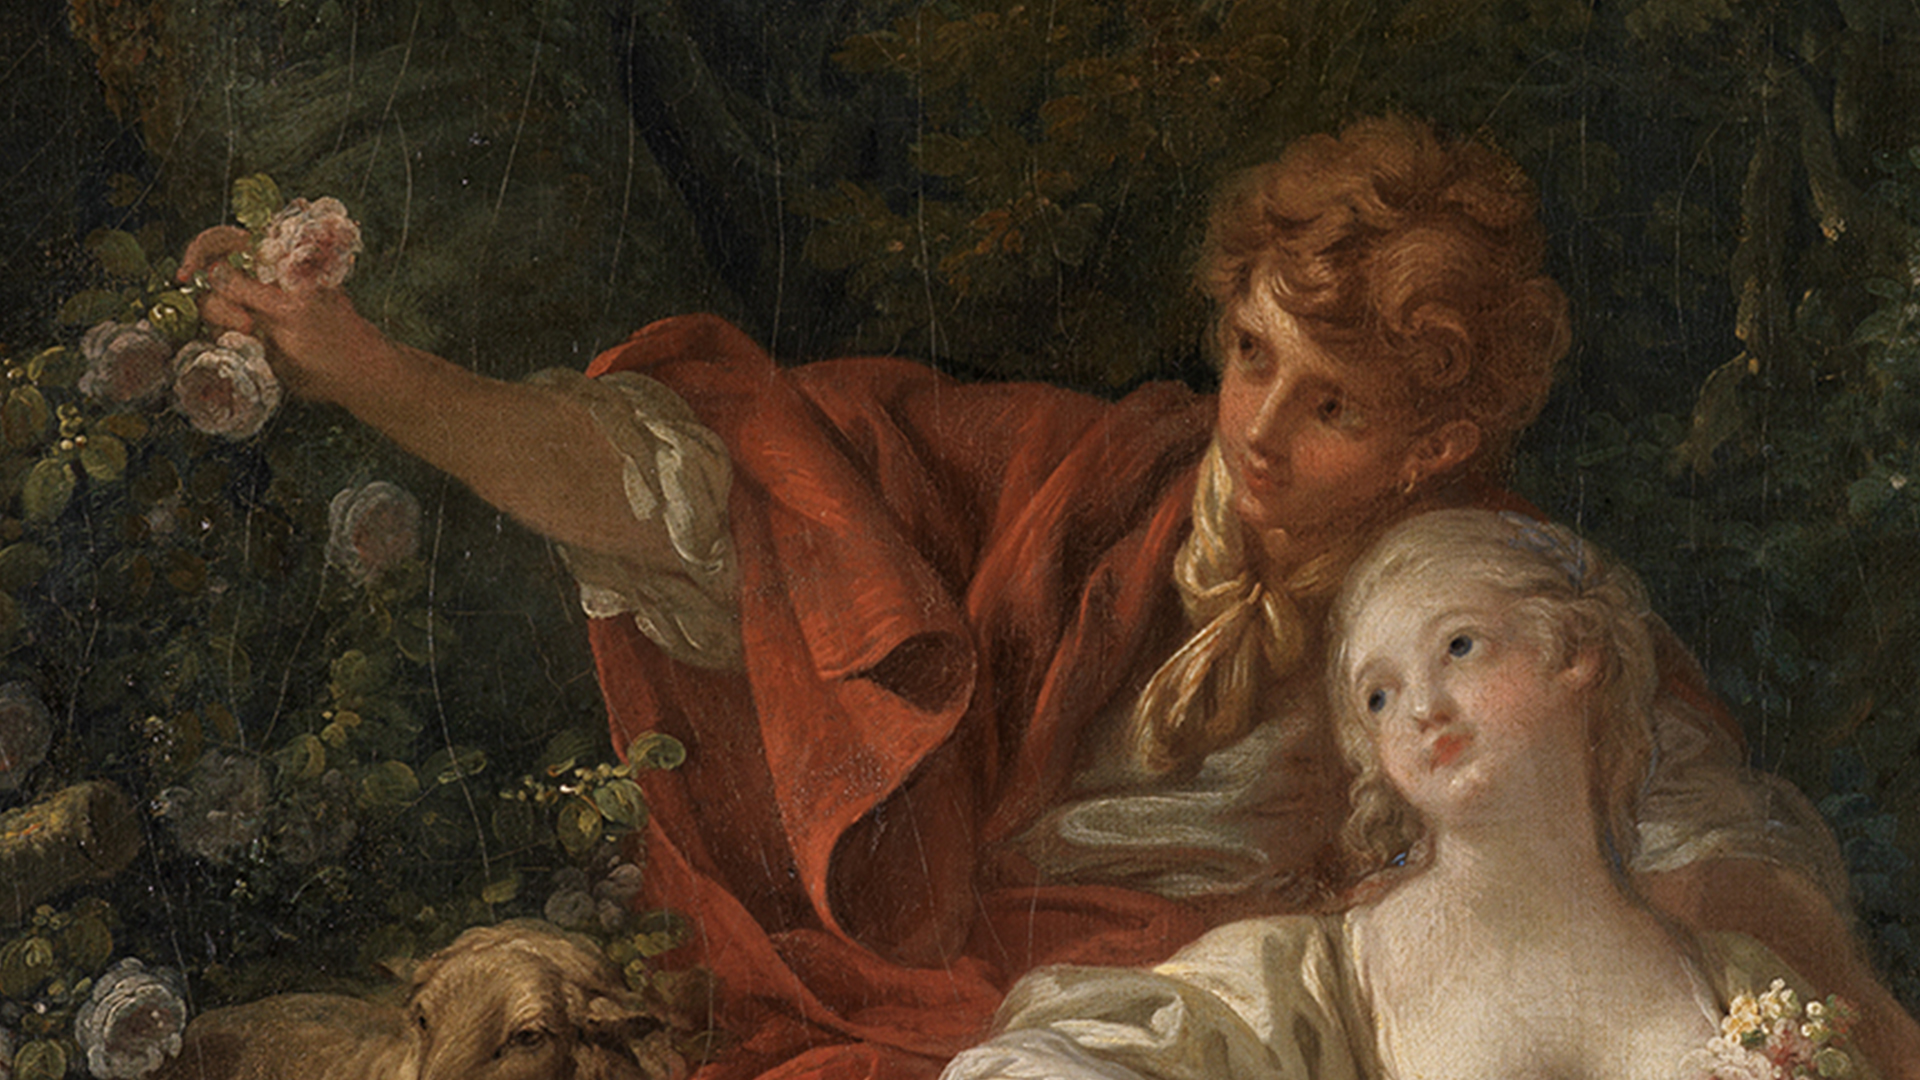 Catalog François BoucherDetail of François Boucher's painting Shepherd and Shepherdess, in which a couple is staged in nature surrounded by flowers